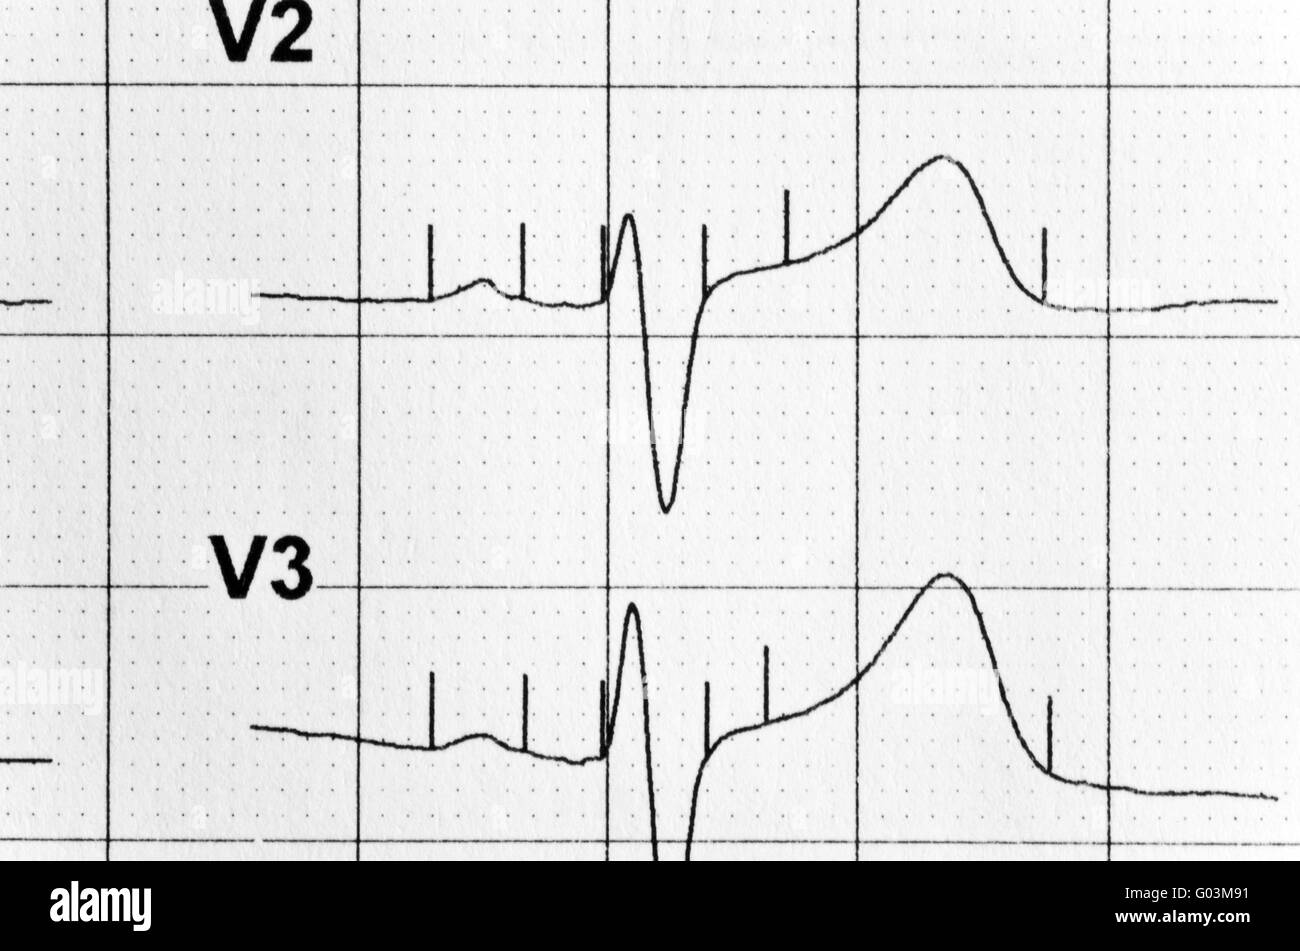 schedule of heart rate drawn by the modern medical Stock Photo